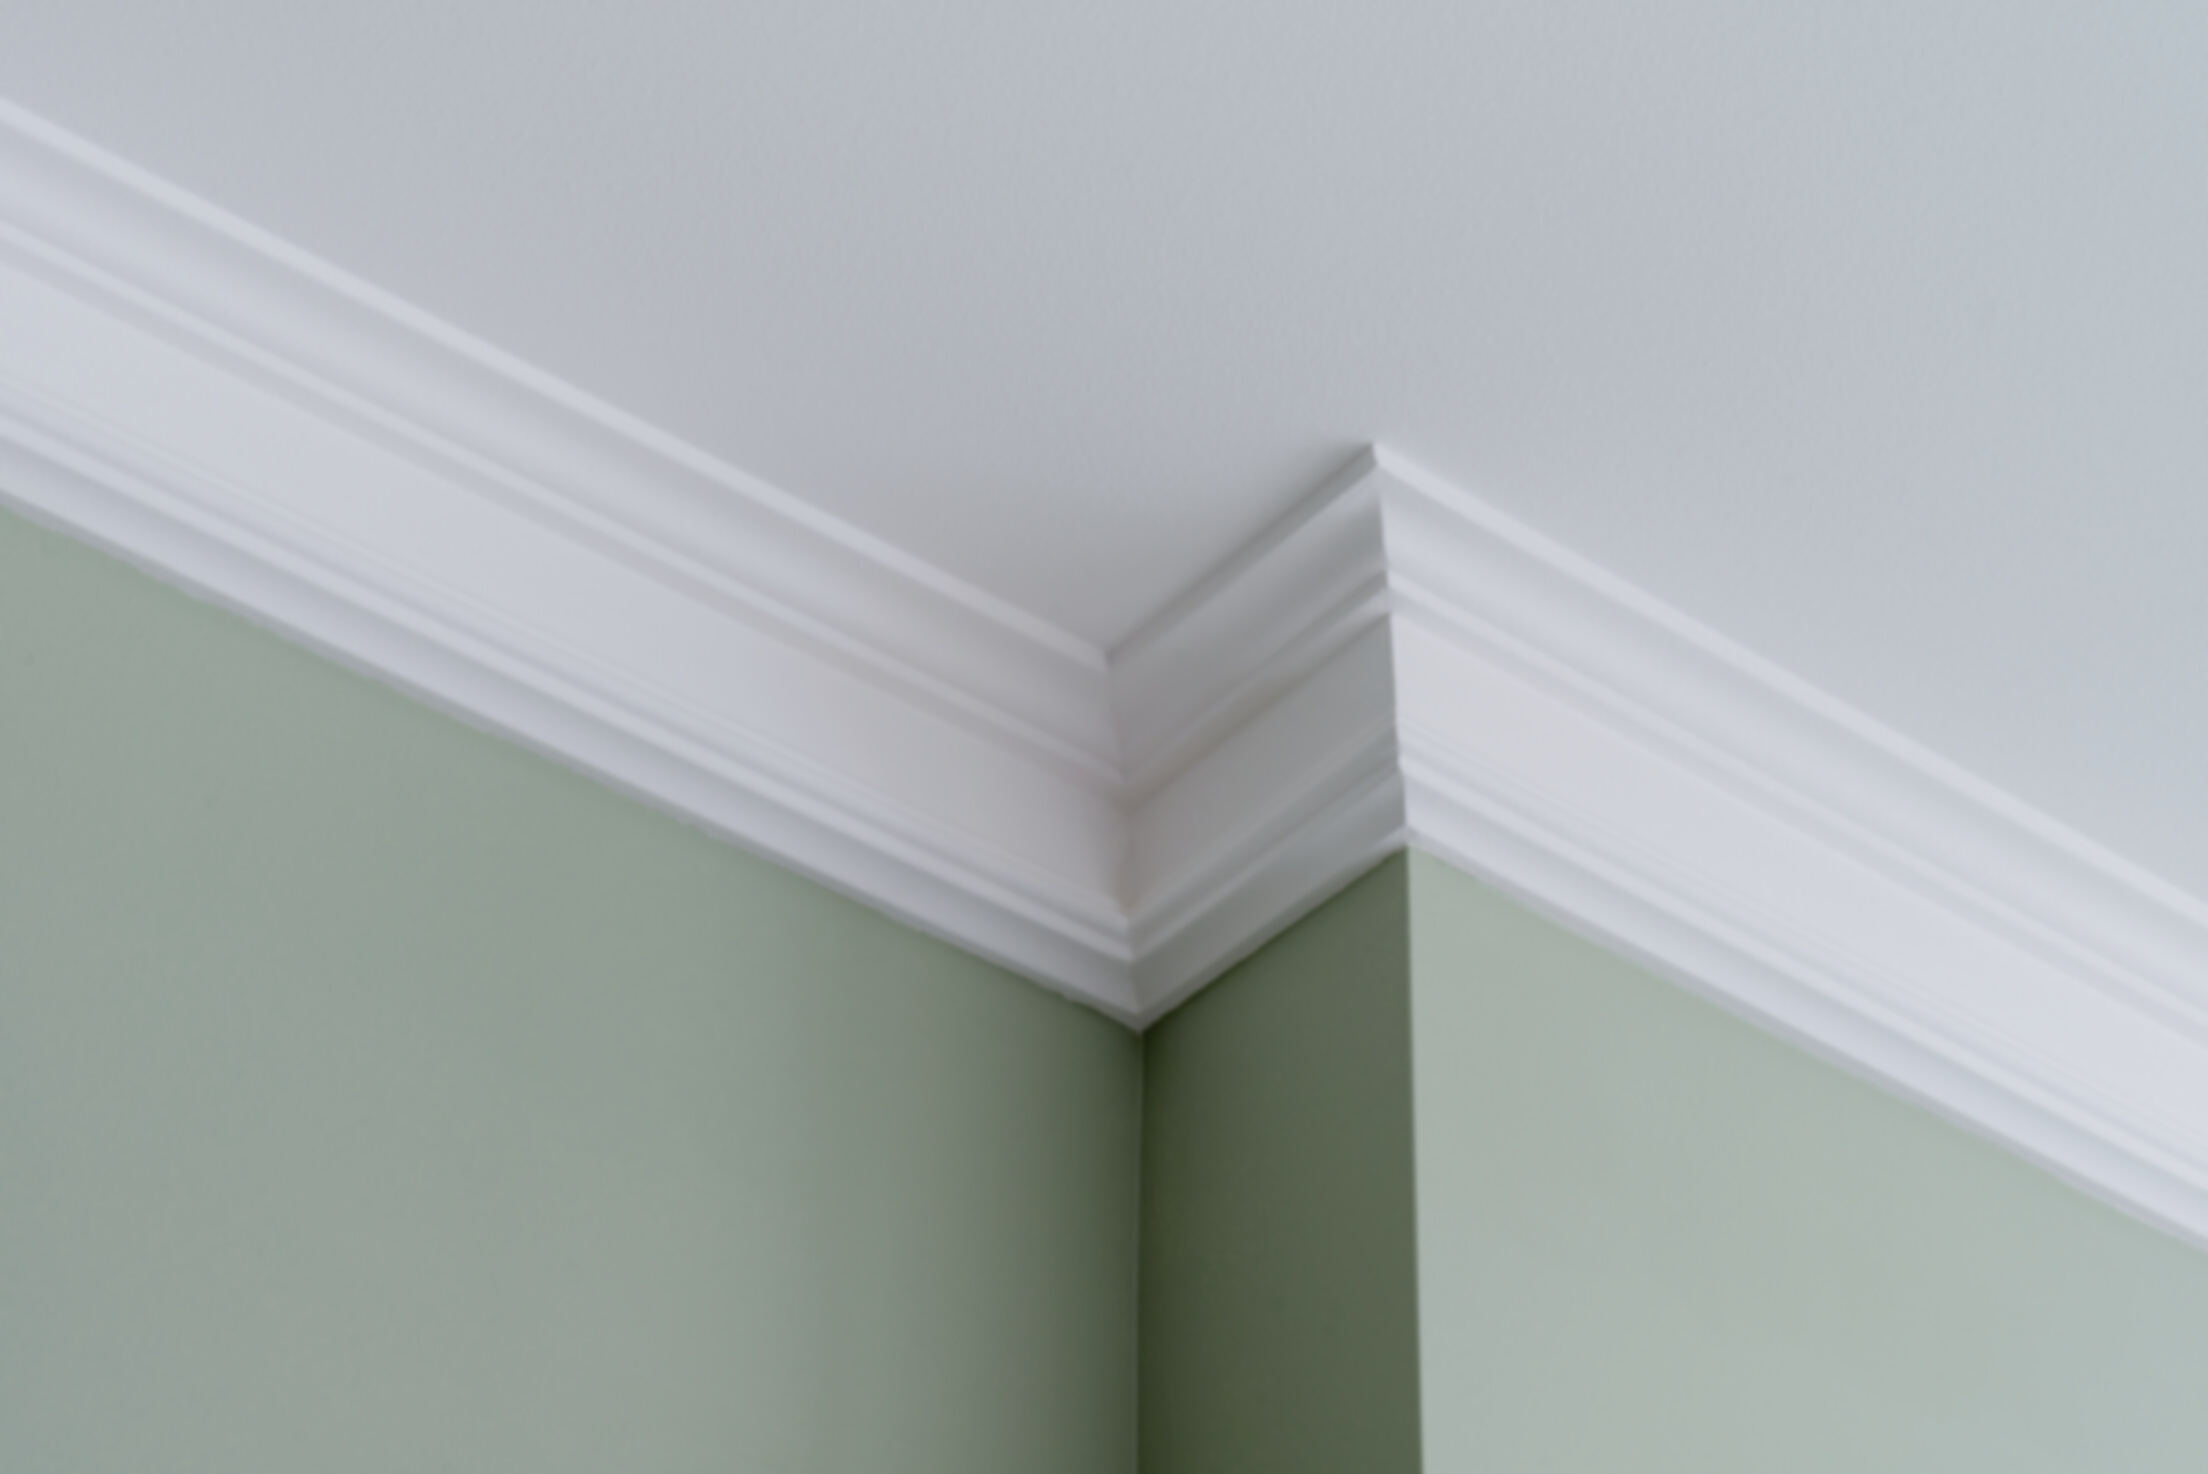 Ceiling Moldings in the Interior